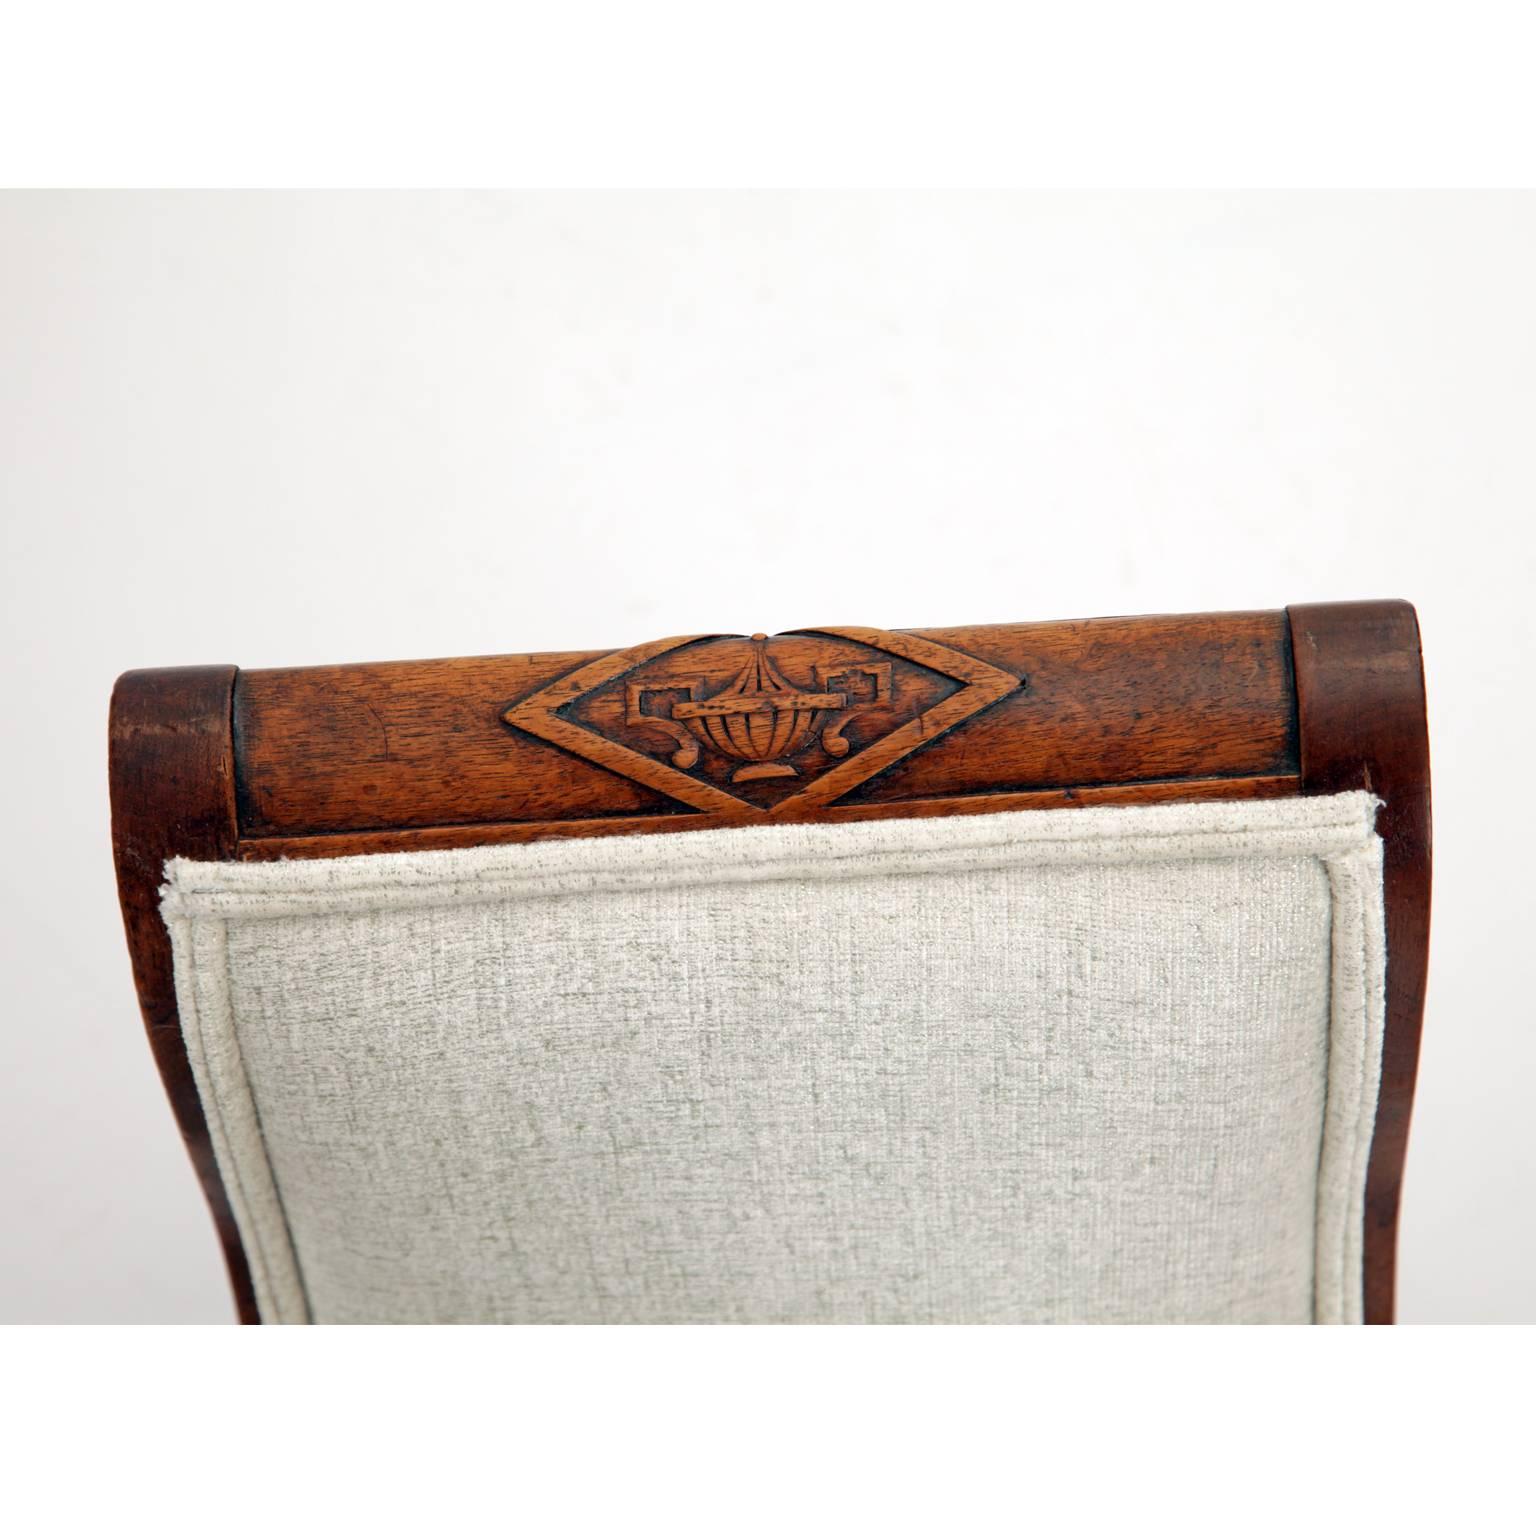 Walnut Small Neoclassical Banquette or Foot Stool, Early 19th Century